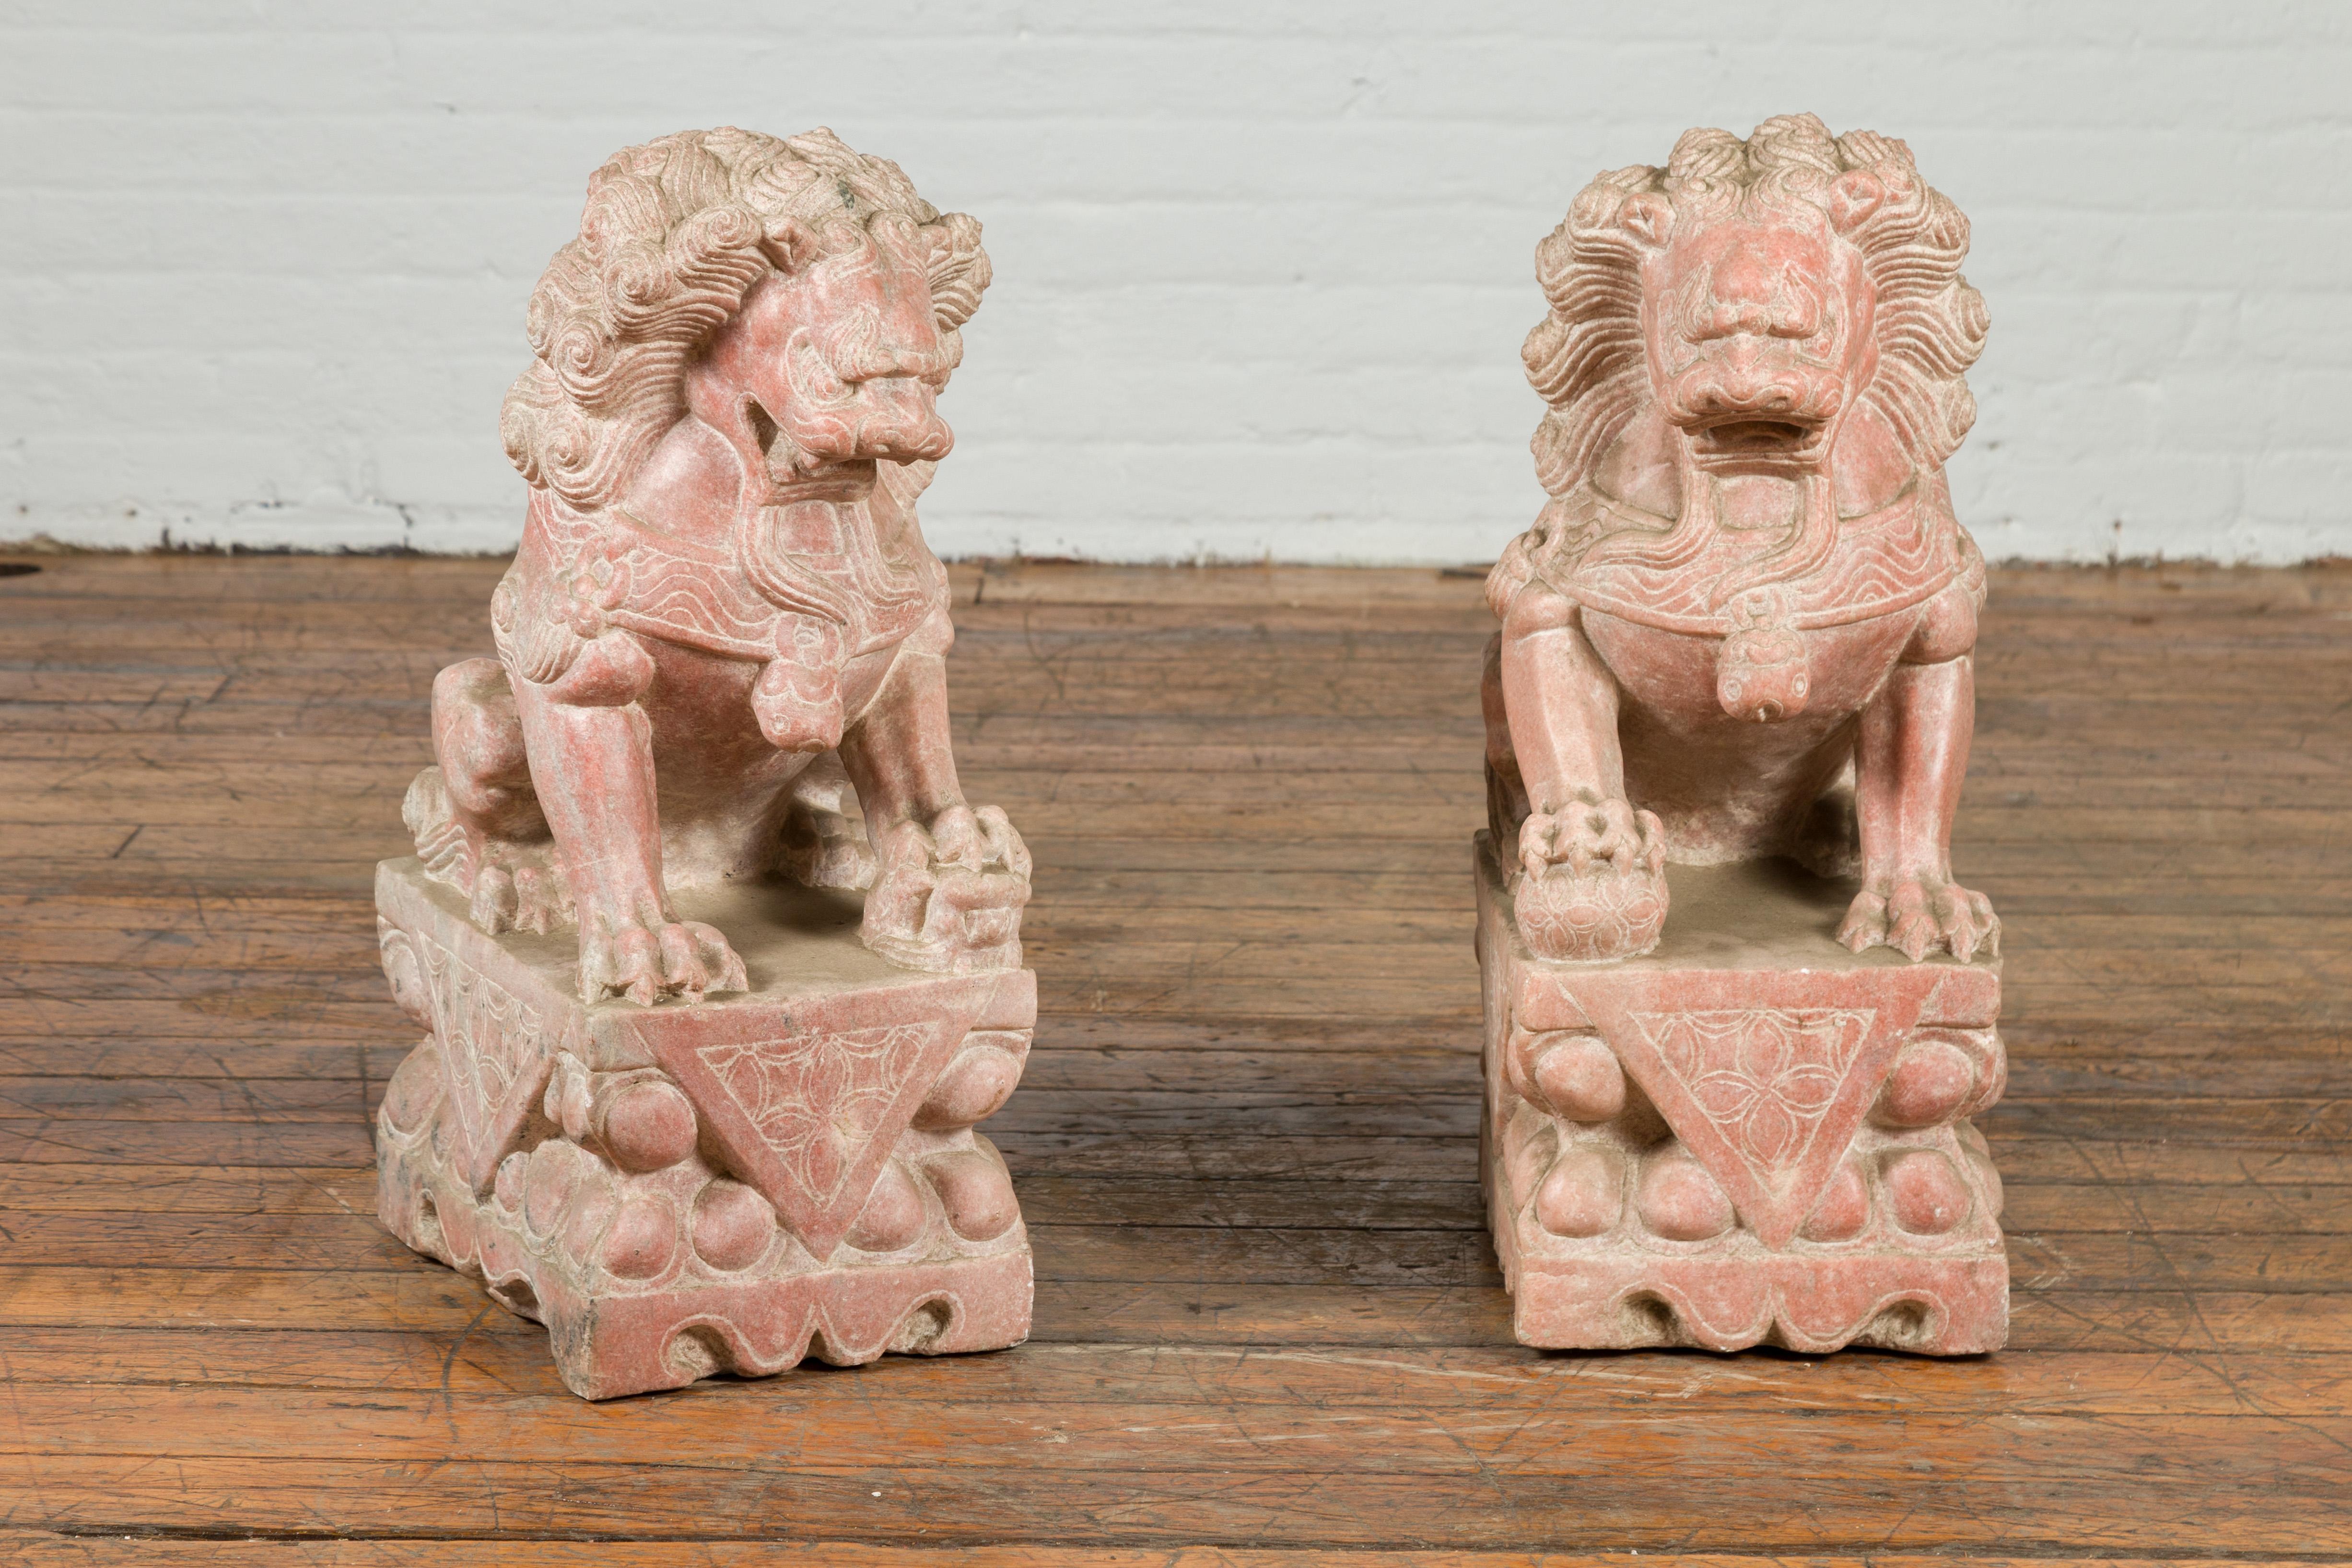 A pair of vintage Chinese stone Foo Dogs guardian lions from the mid-20th century, with sandstone patina, on rectangular bases. Created in China during the midcentury period, this pair of Chinese guardian lions features a left and right facing male